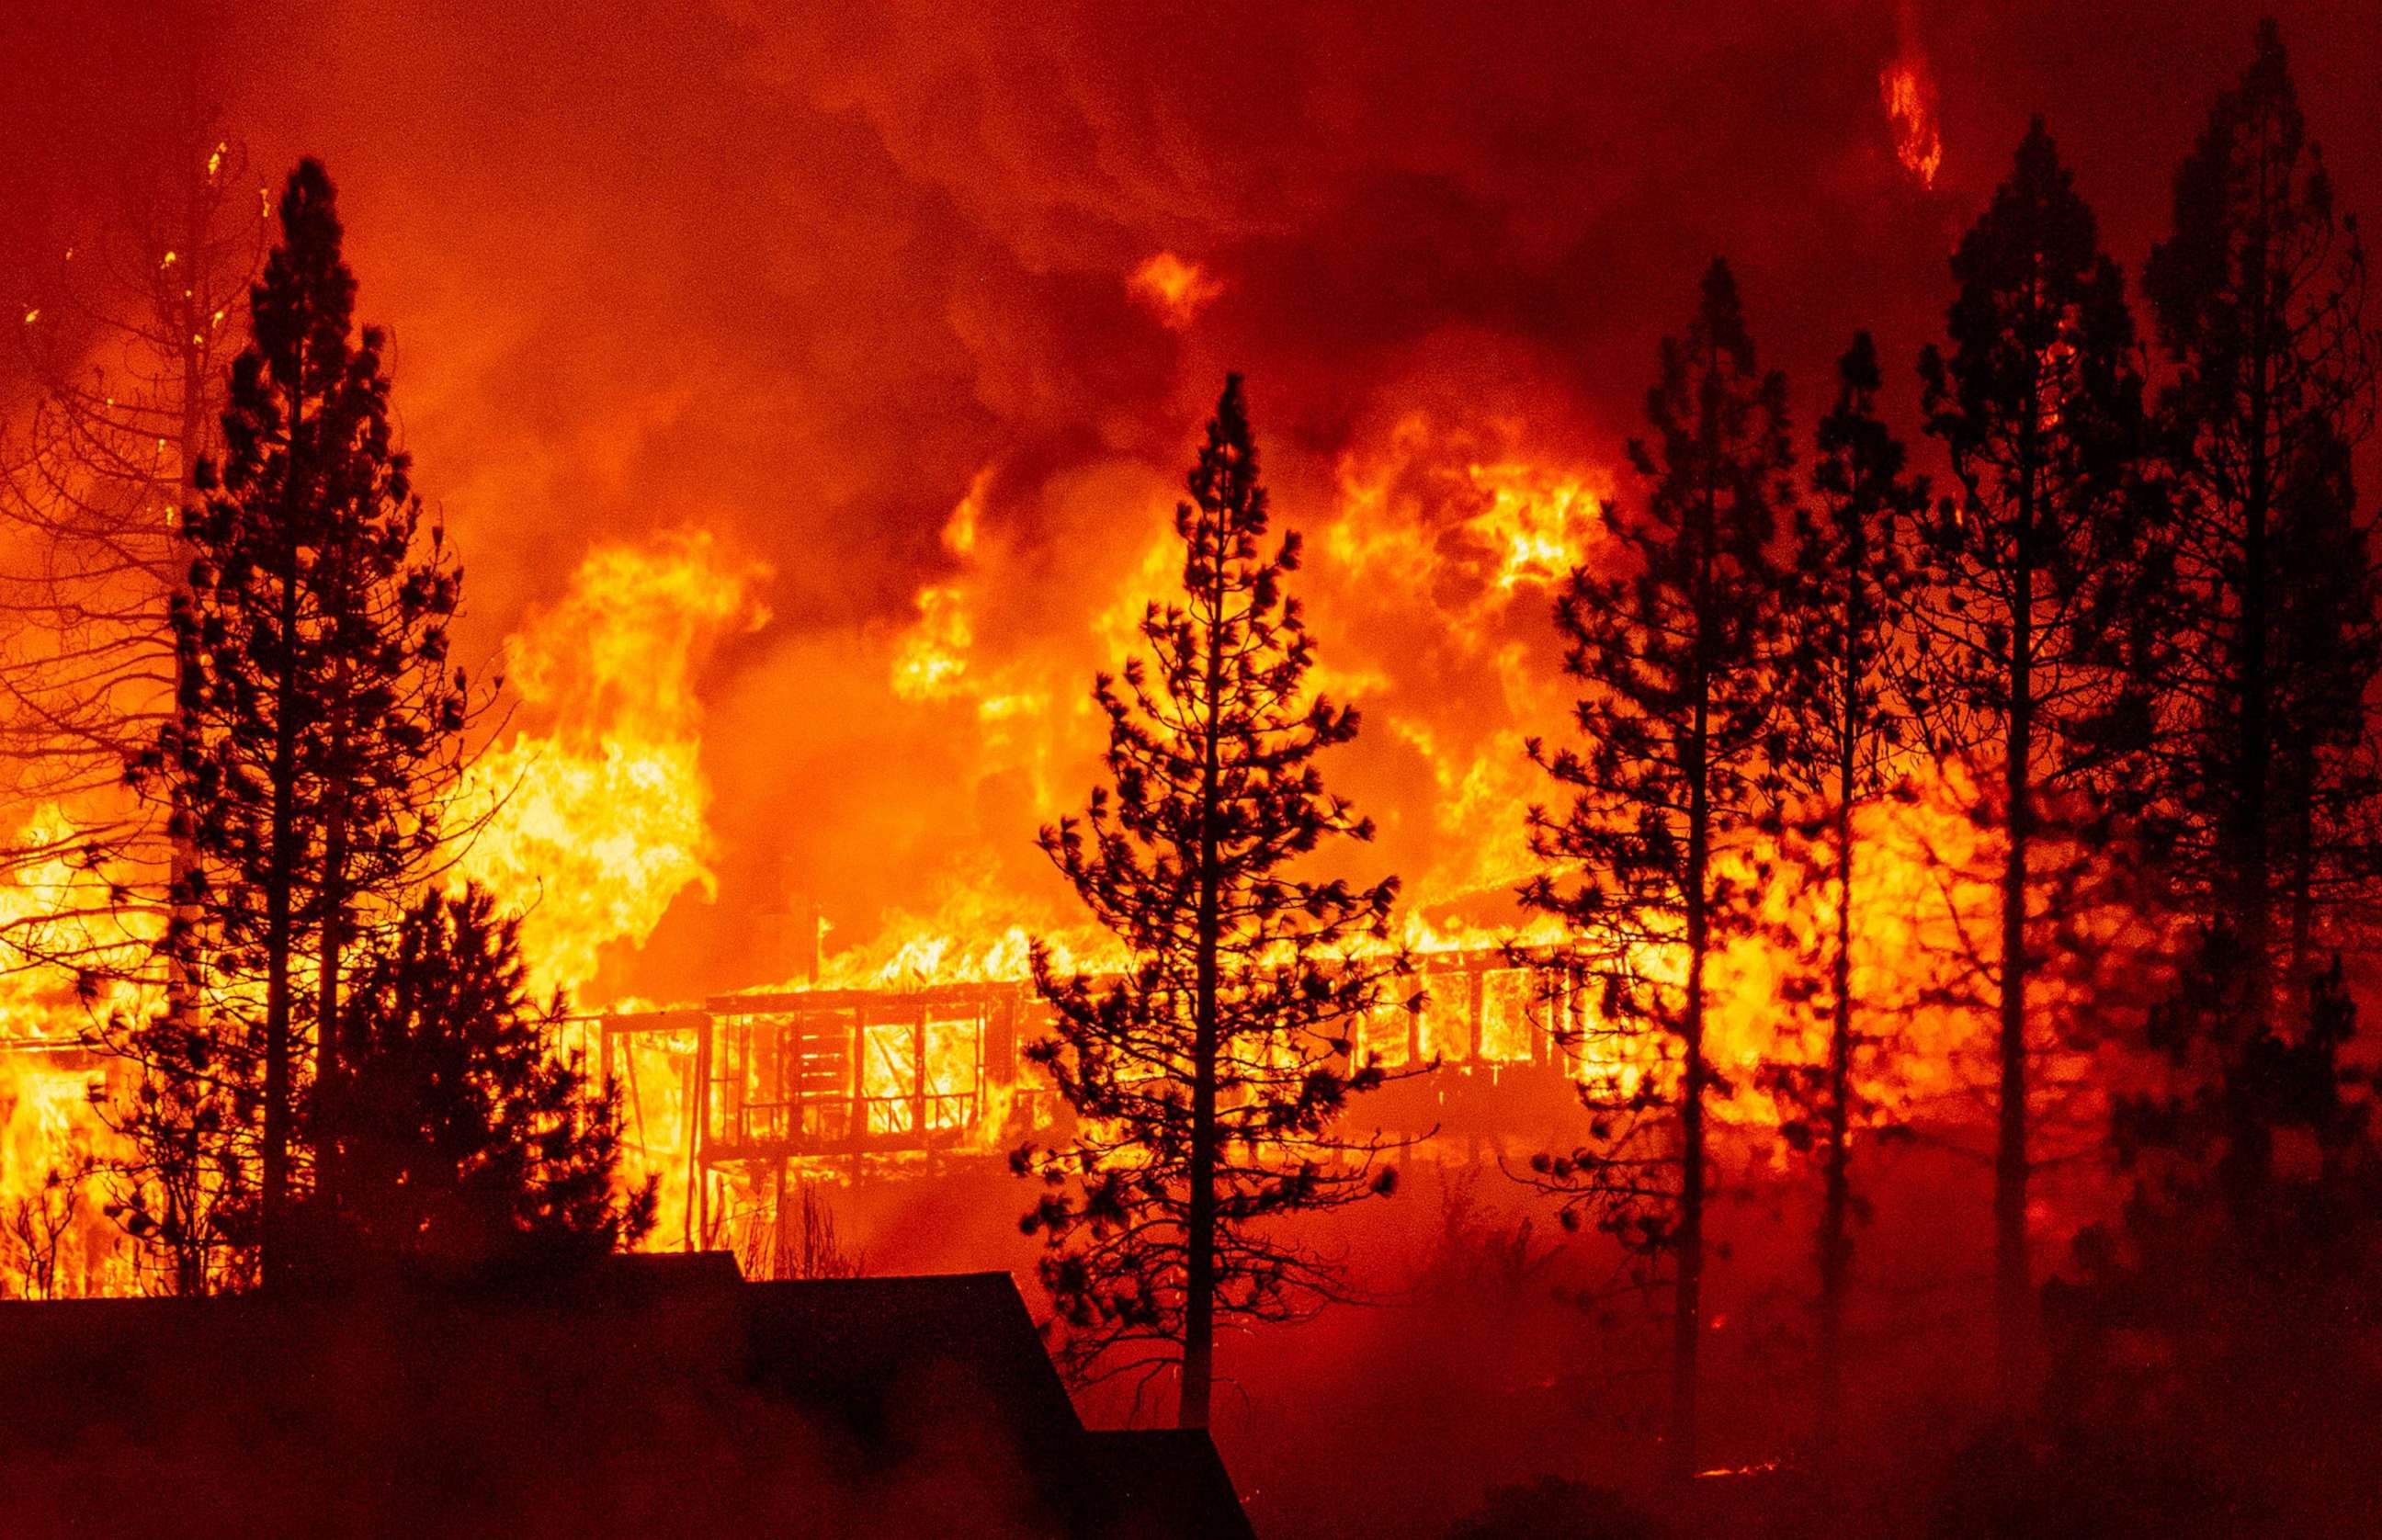 PHOTO: In this Sept. 8, 2020, file photo, a home is engulfed in flames during the "Creek Fire" in the Tollhouse area of unincorporated Fresno County, Calif.